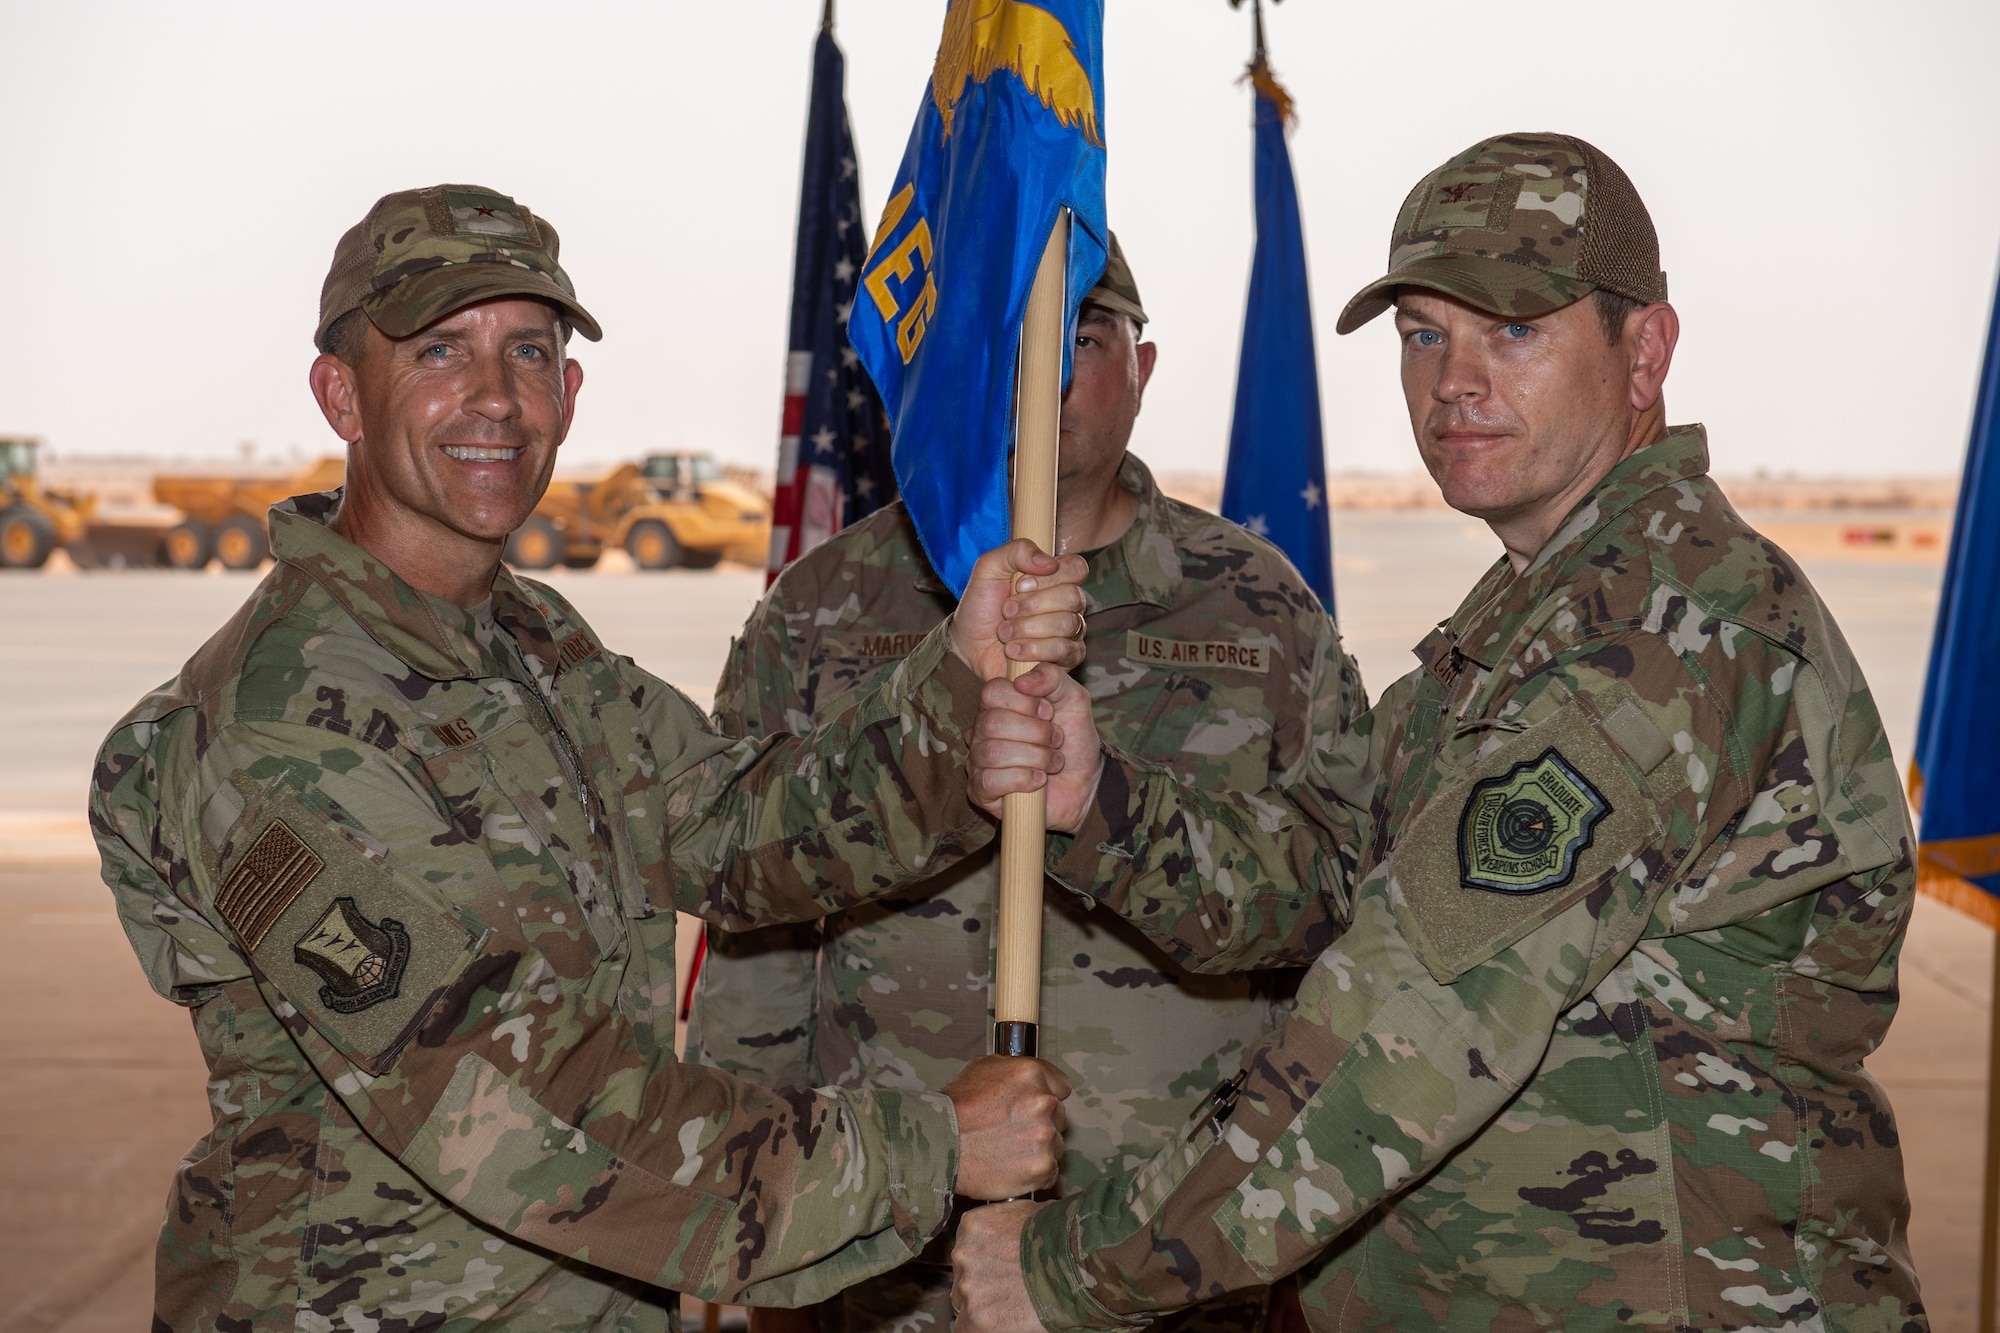 U.S. Air Force Col. Jonathan M. Creer, right, assumes command of the 409th Air Expeditionary Group with Brig. Gen. Michael T. Rawls, 435th Air Ground Operations Wing and 435th Air Expeditionary Wing commander, at Air Base 201, Niger, June 28, 2019. The passing of the guidon is a military tradition signifying the change of authority and responsibility of a unit from one commander to another. (U.S. Air Force photo by Staff Sgt. Devin Boyer)